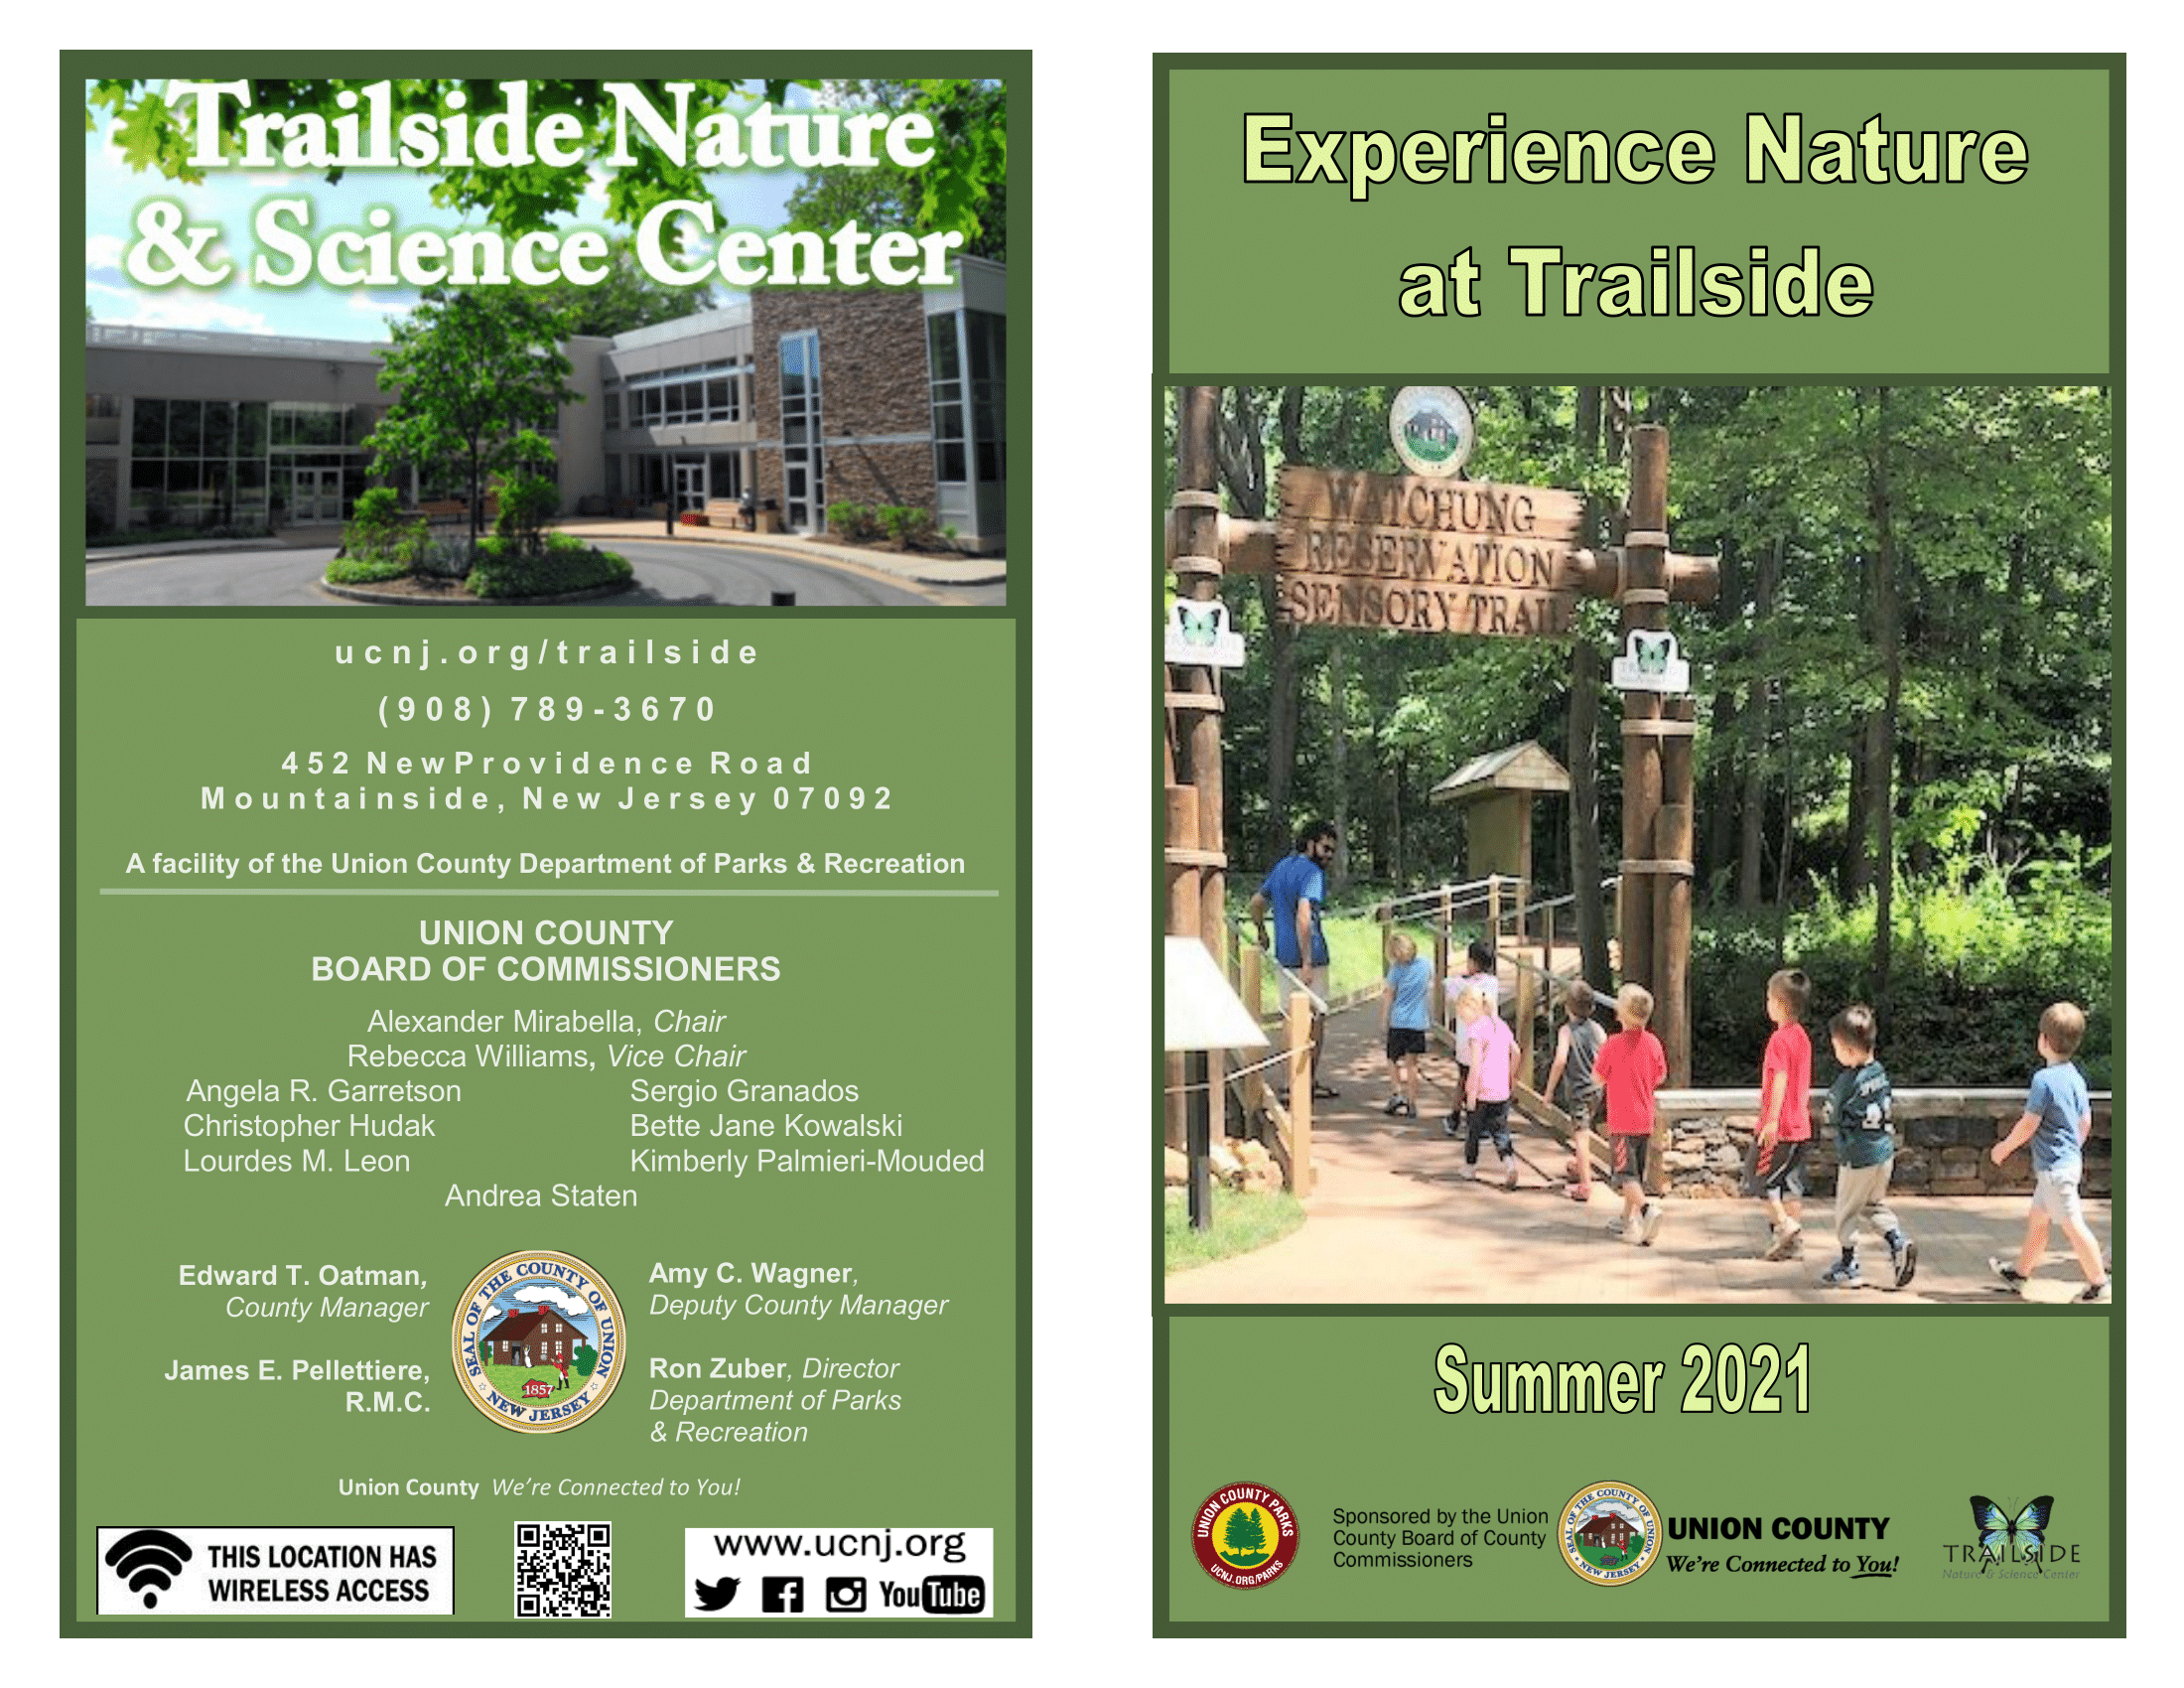 trailside nature and science center flyer and experience nature at trailside flyer